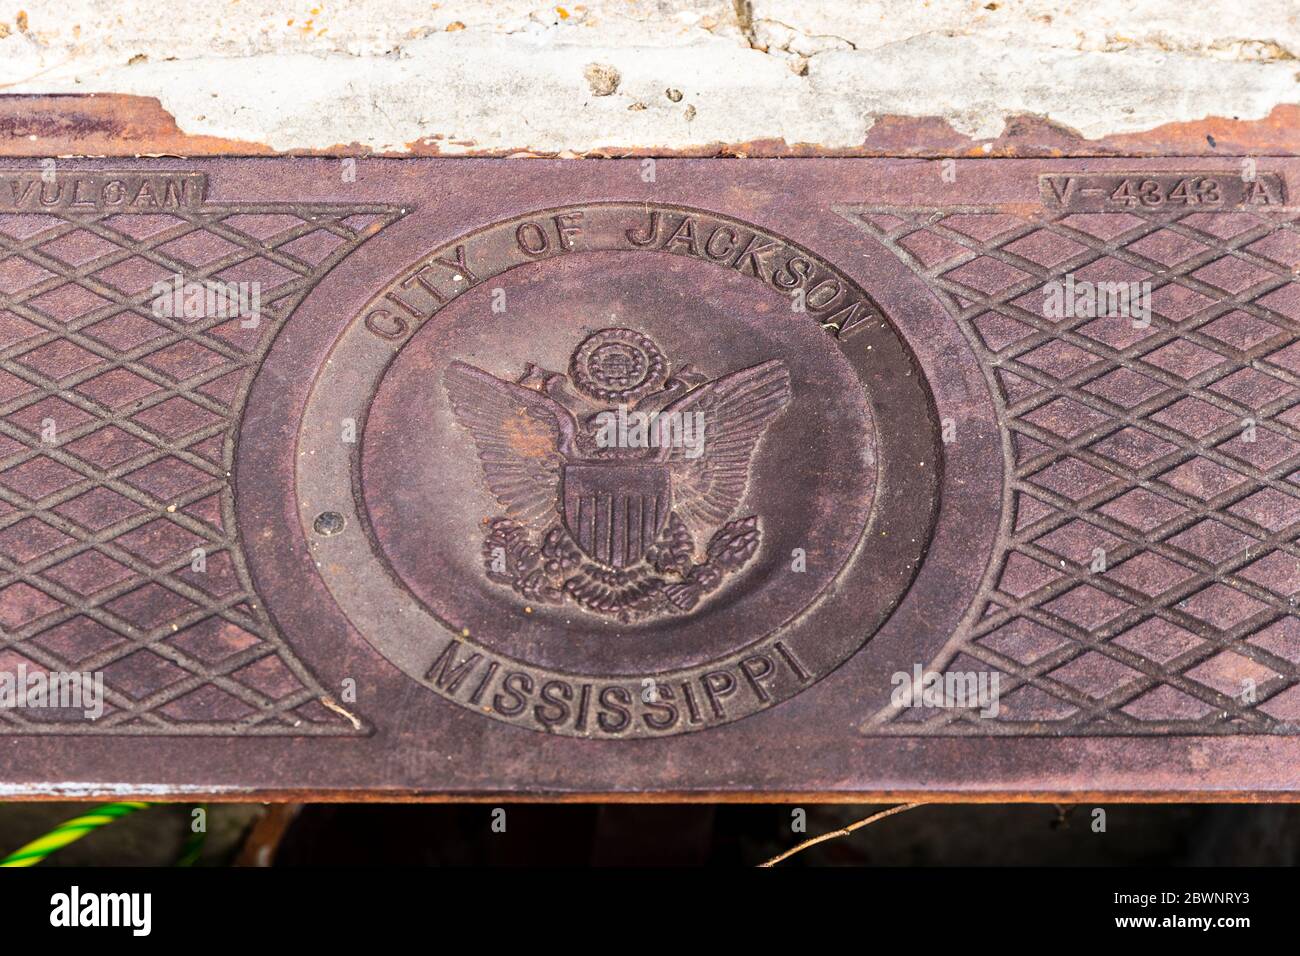 Jackson, MS / USA, June 1, 2020: Storm drain with seal of the the City of Jackson, Mississippi on it. Stock Photo